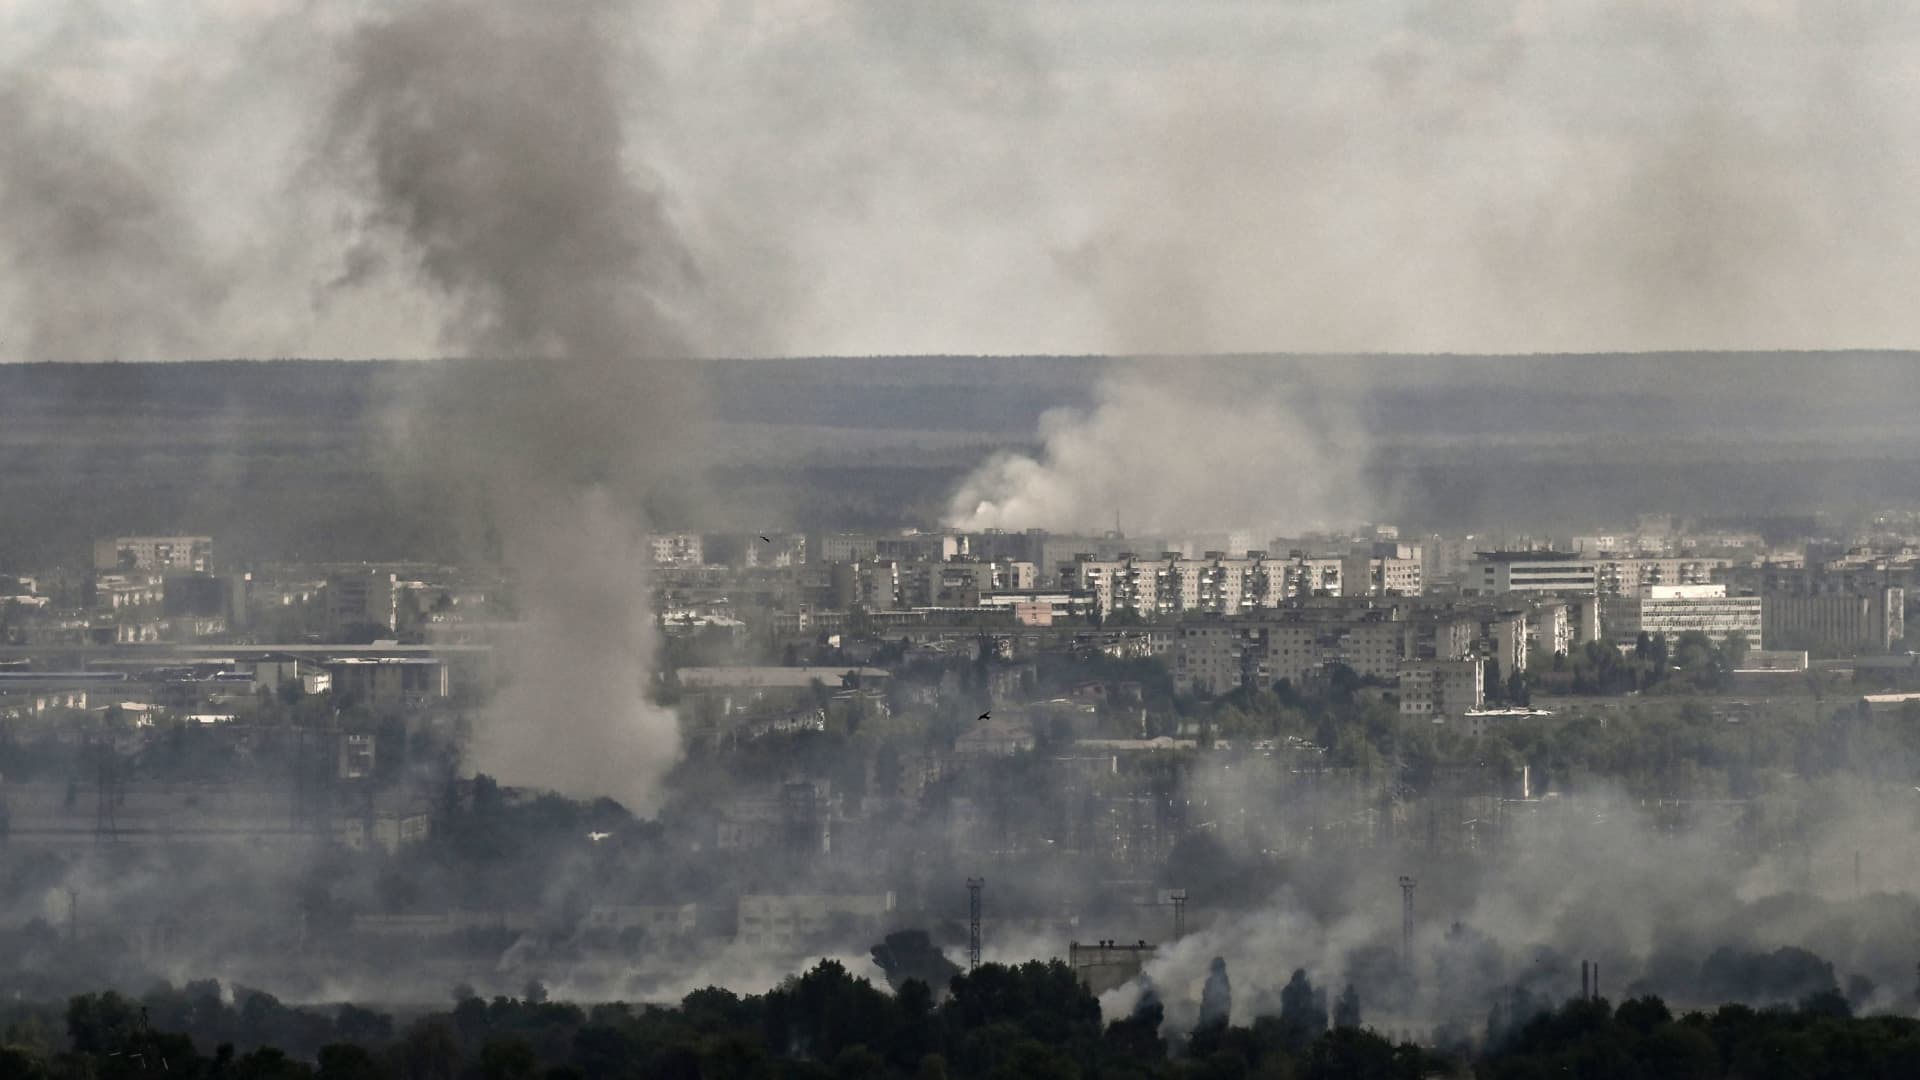 Smoke and dirt rise from shelling in the city of Severodonetsk during fight between Ukrainian and Russian troops in the eastern Ukrainian region of Donbas on June 7, 2022.